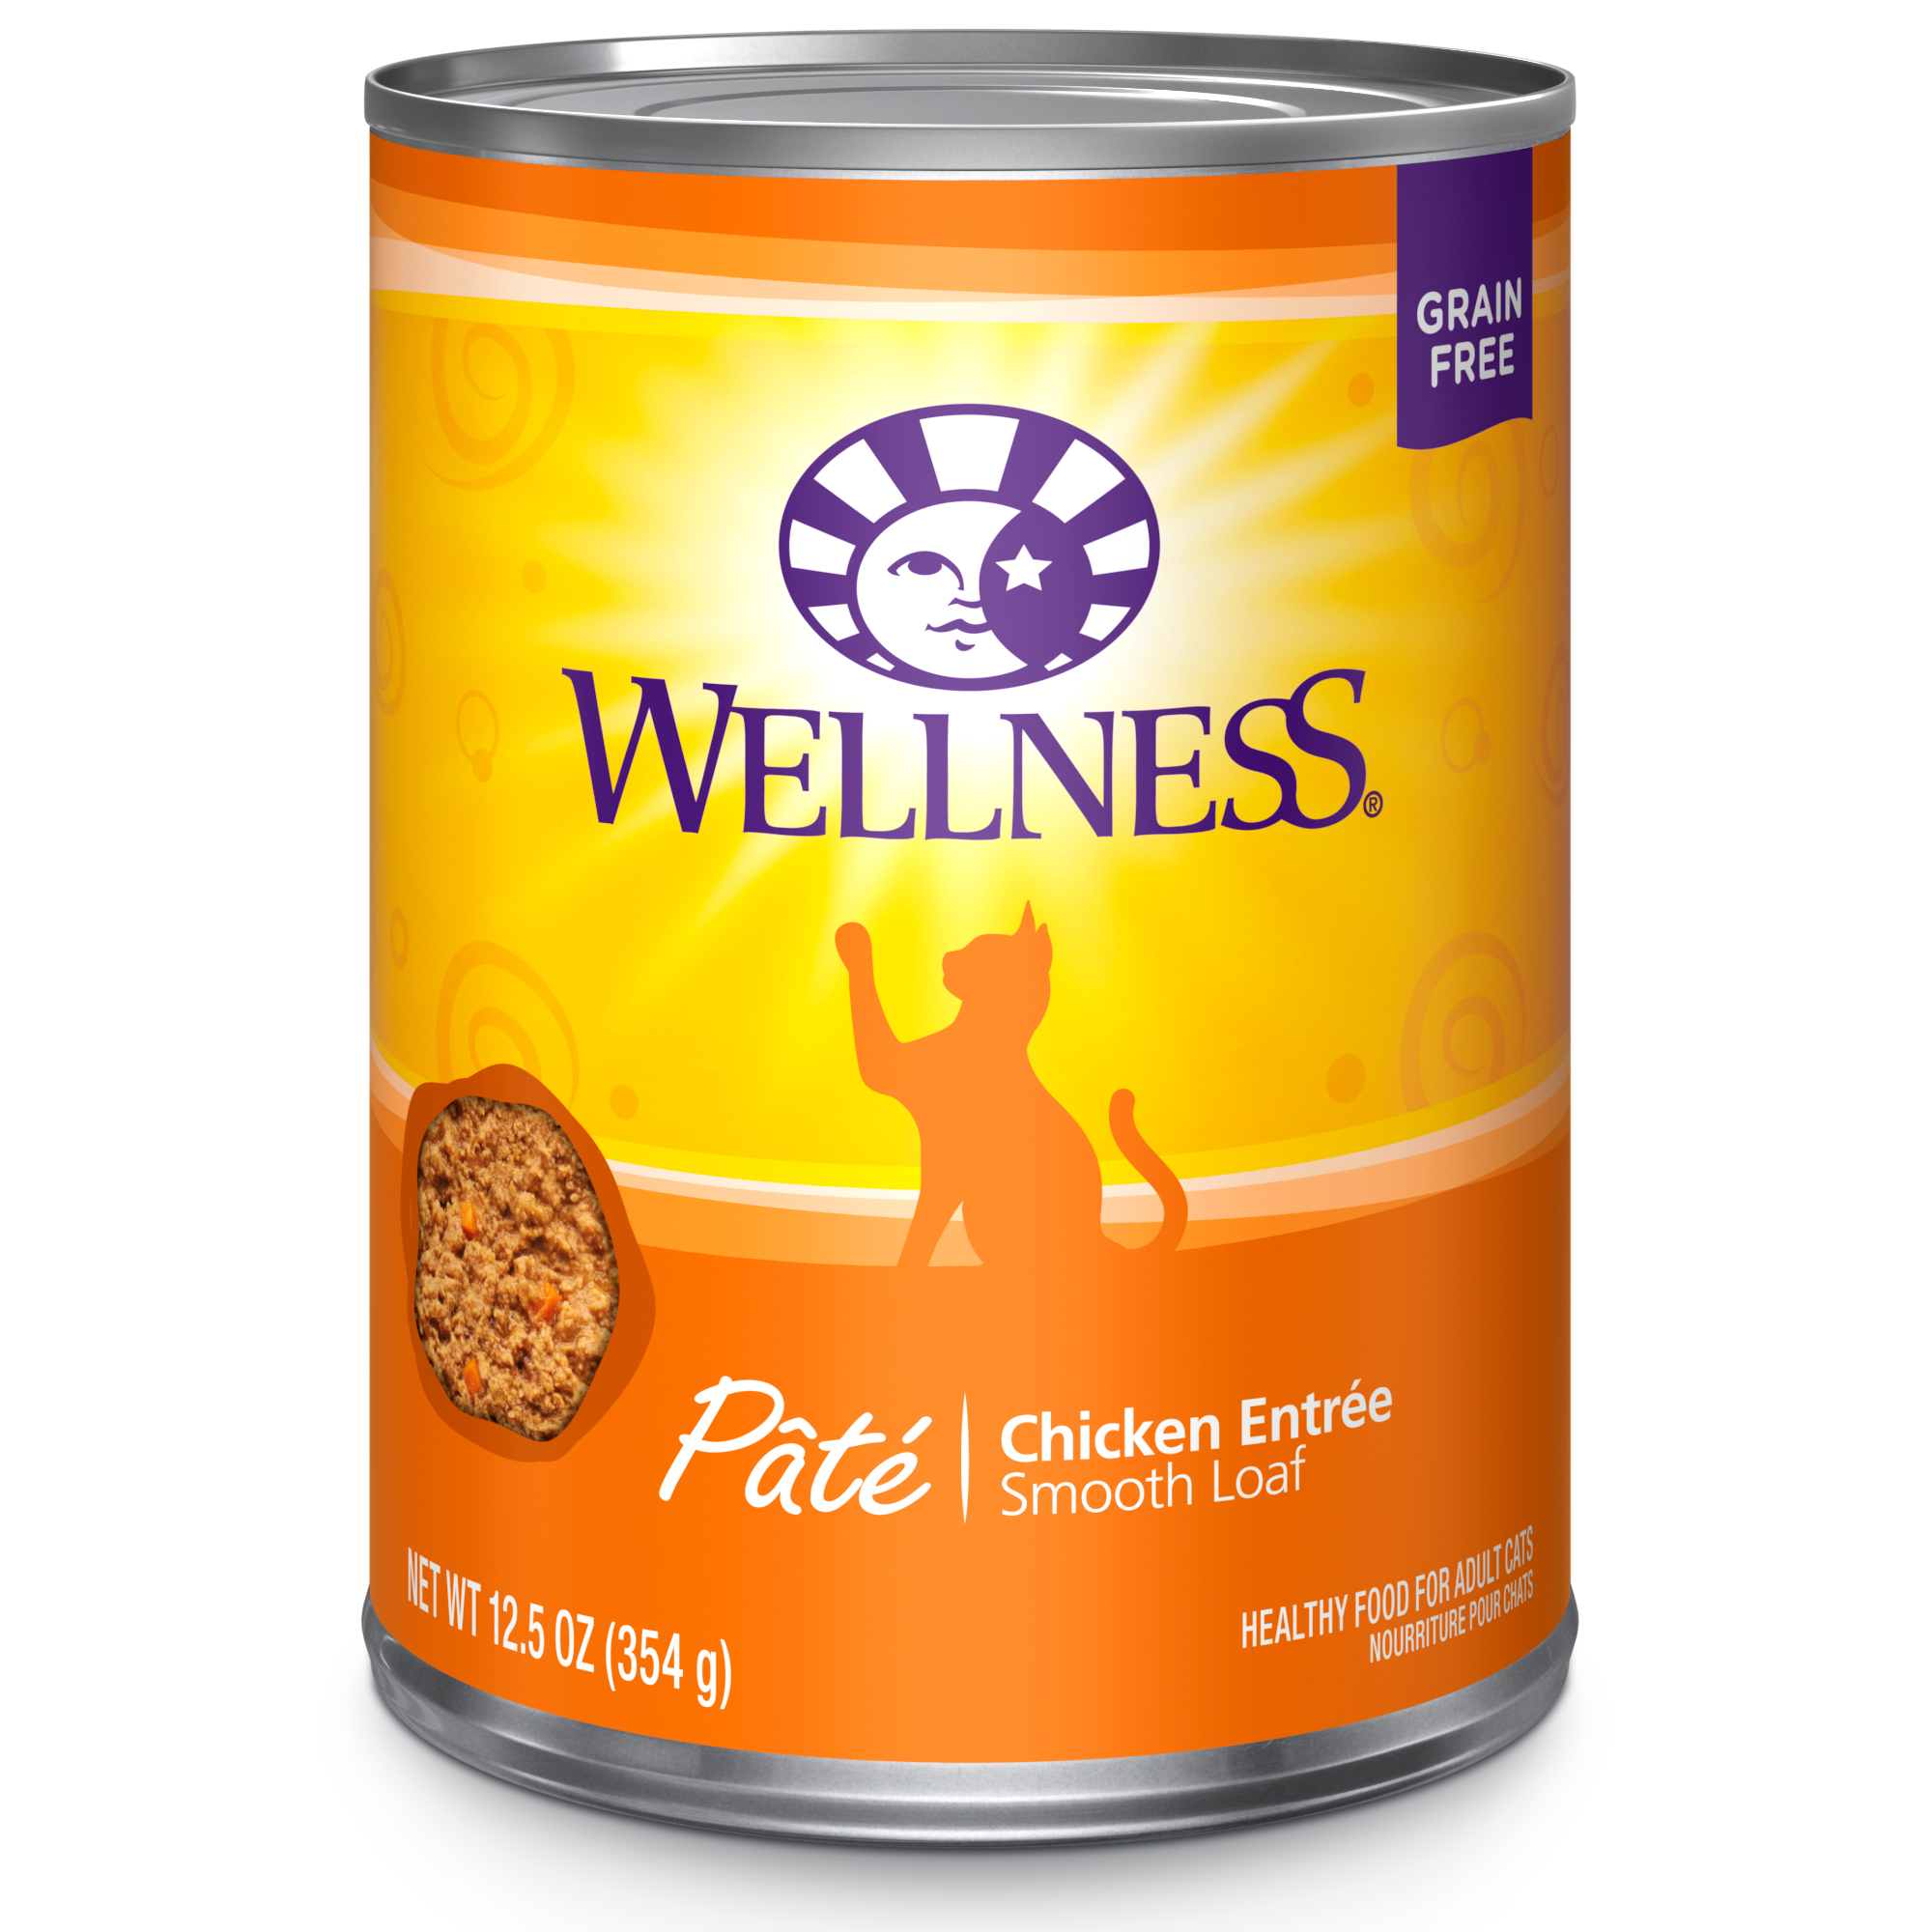 Wellness Complete Health Grain Free Canned Cat Food, Chicken Pate, 12.5 Ounces (Pack of 12) - image 1 of 8